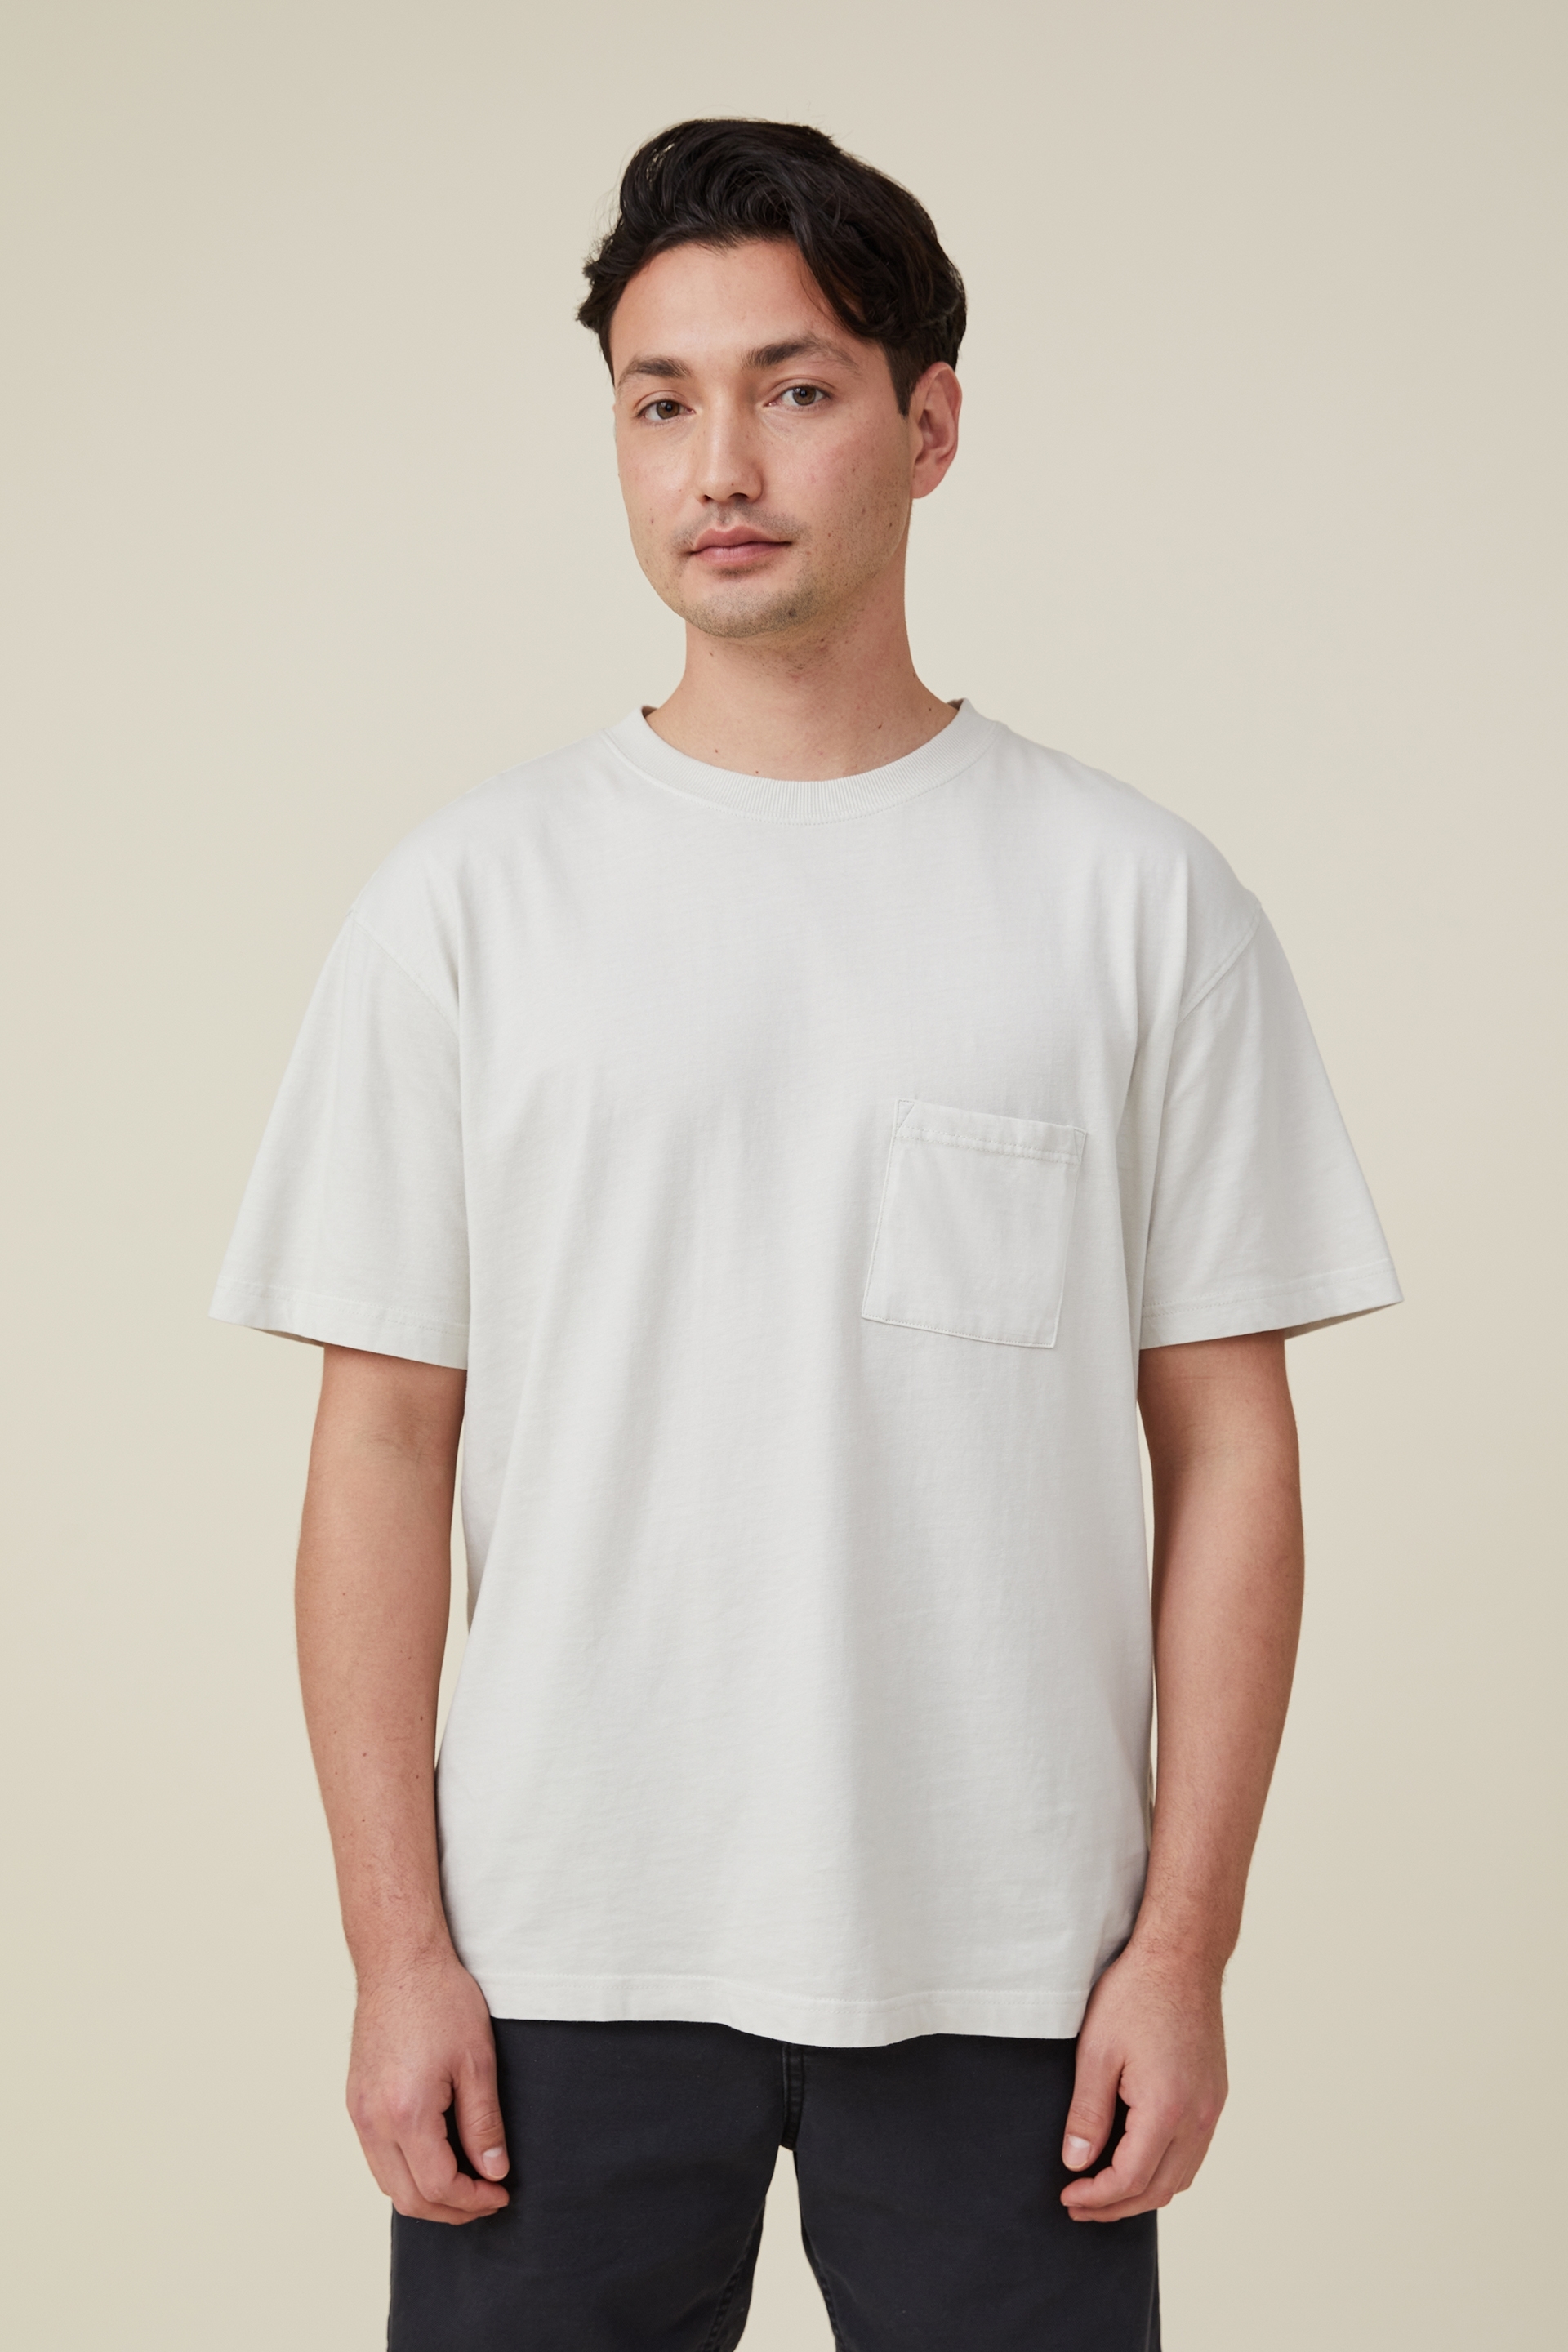 Cotton On Men - Loose Fit T-Shirt - Ivory